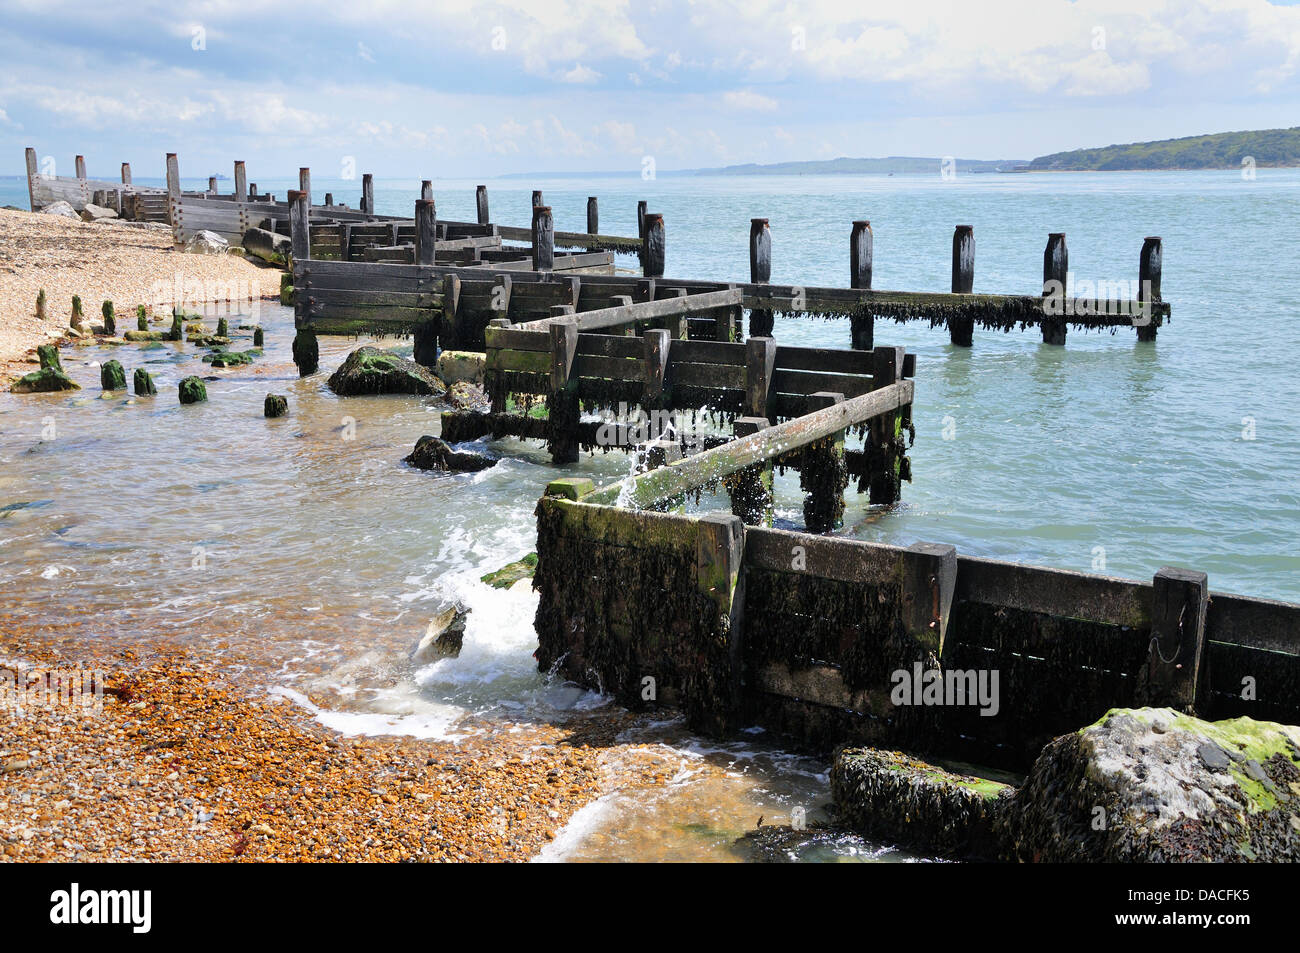 Wooden pilings on the Solent, Milford on Sea, England Stock Photo